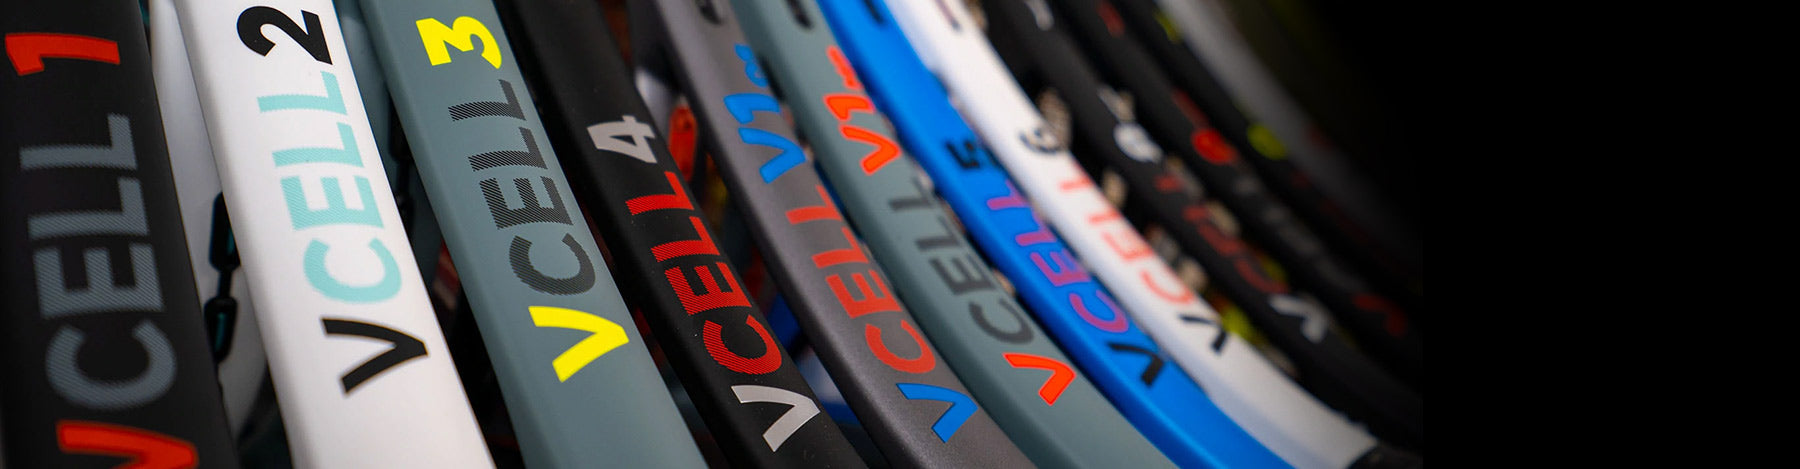 Close up view of the the Volkl V-Cell family of tennis racquets sitting in a row.